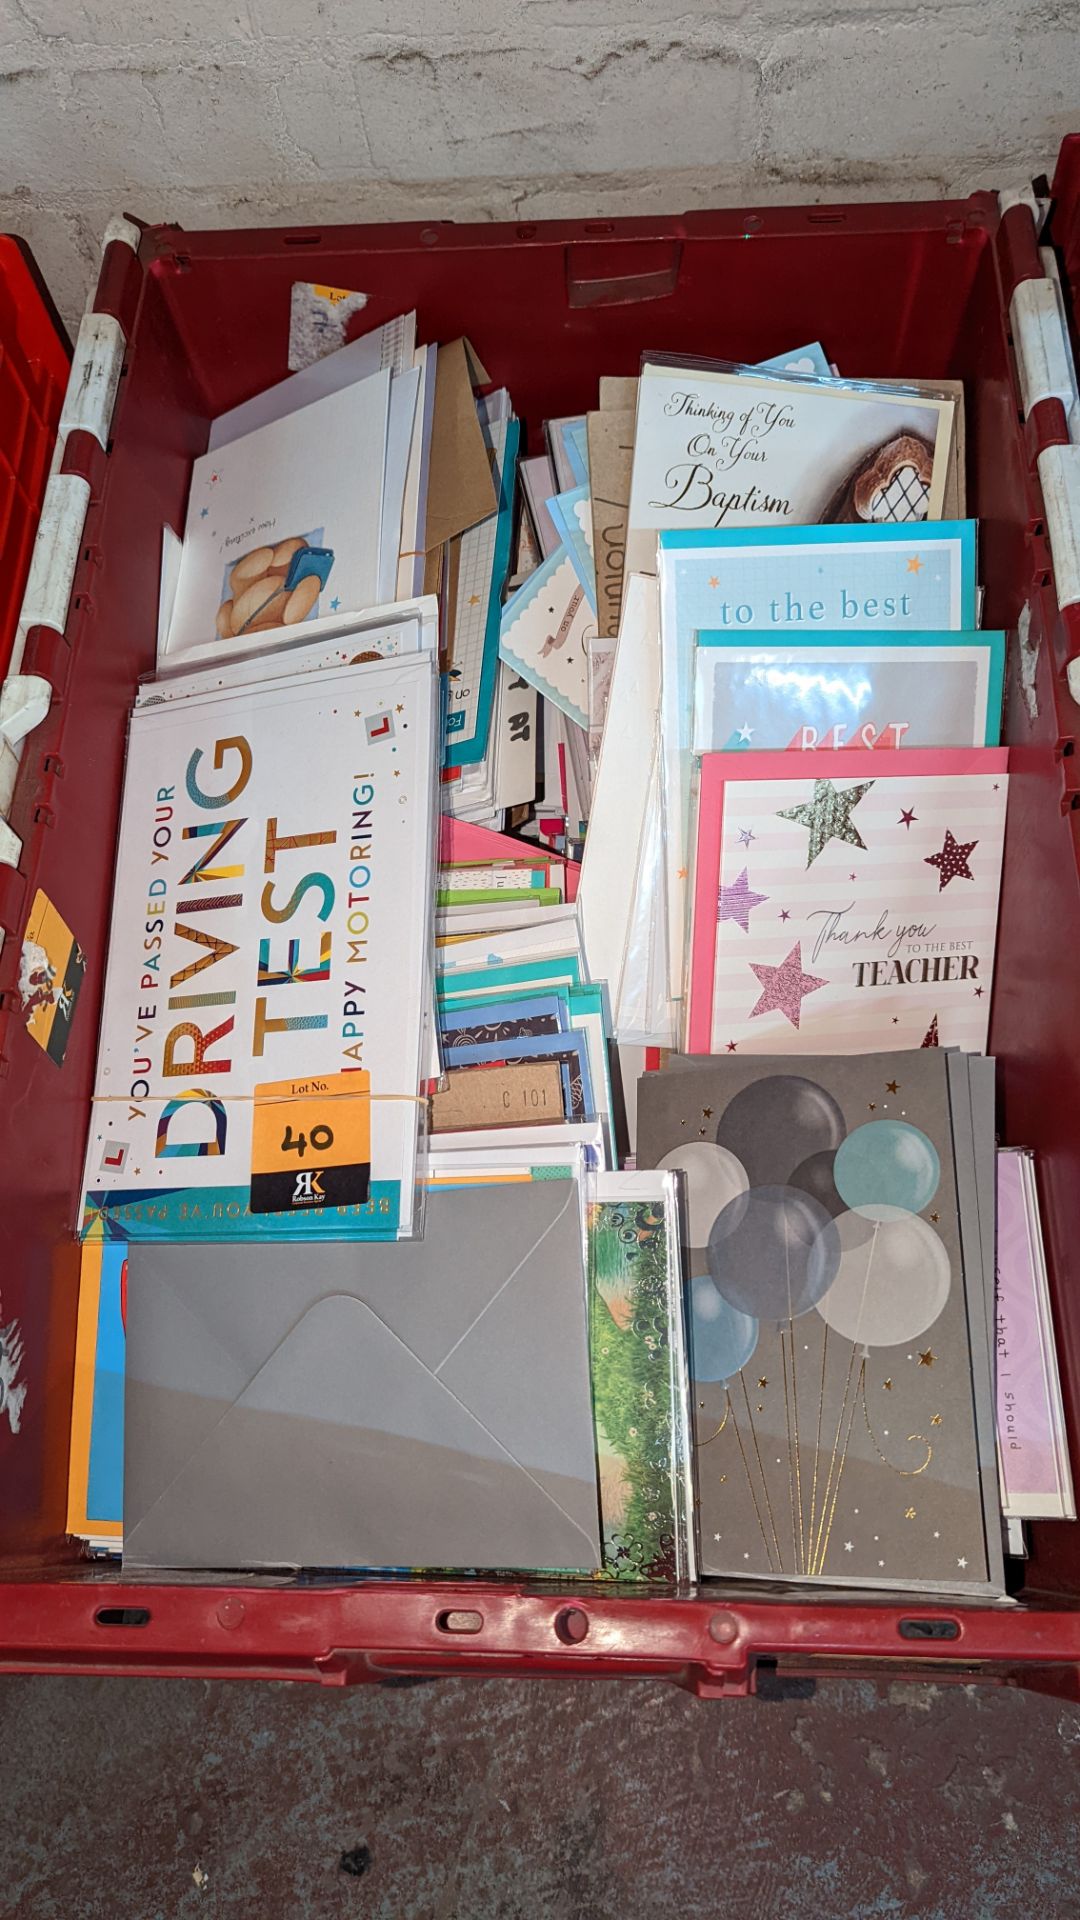 Contents of a crate of greetings cards - crate excluded - Image 5 of 7